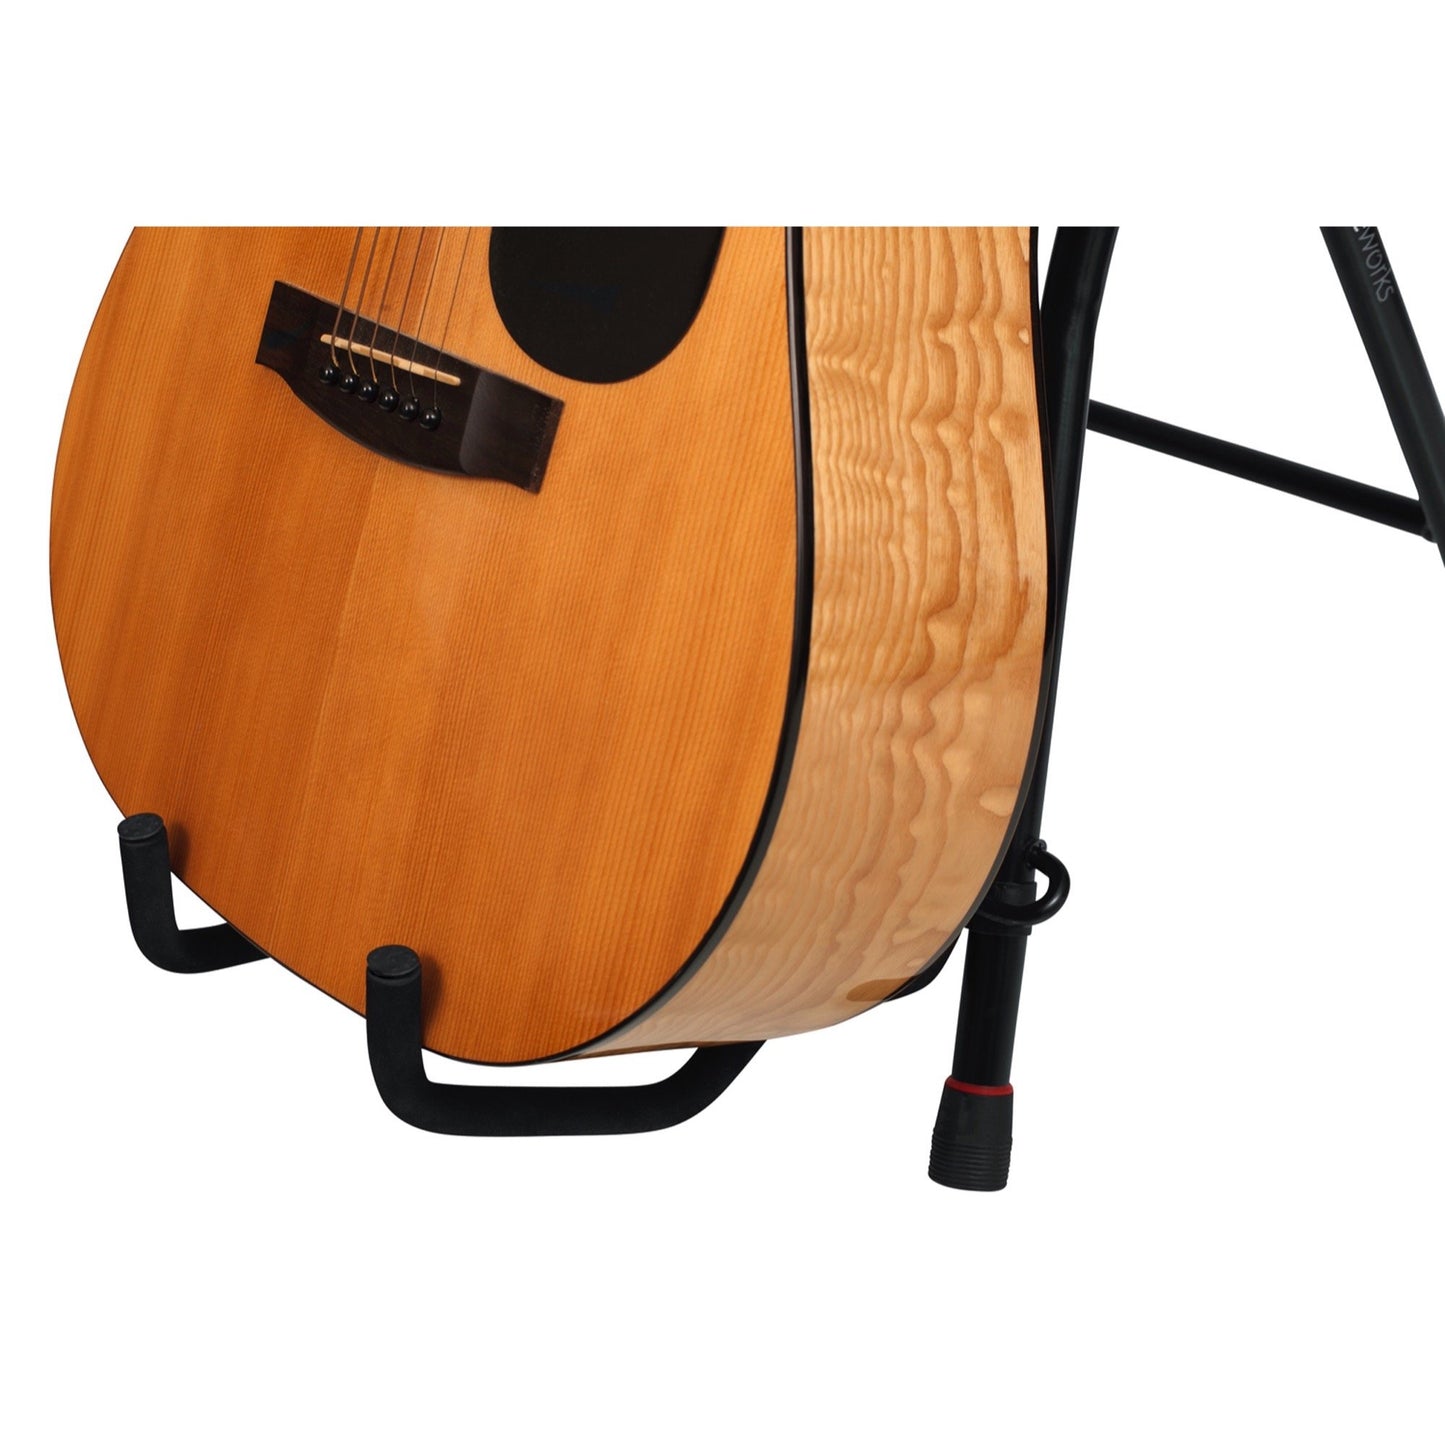 Gator Frameworks Combination Guitar Performance Seat and Single Guitar Stand